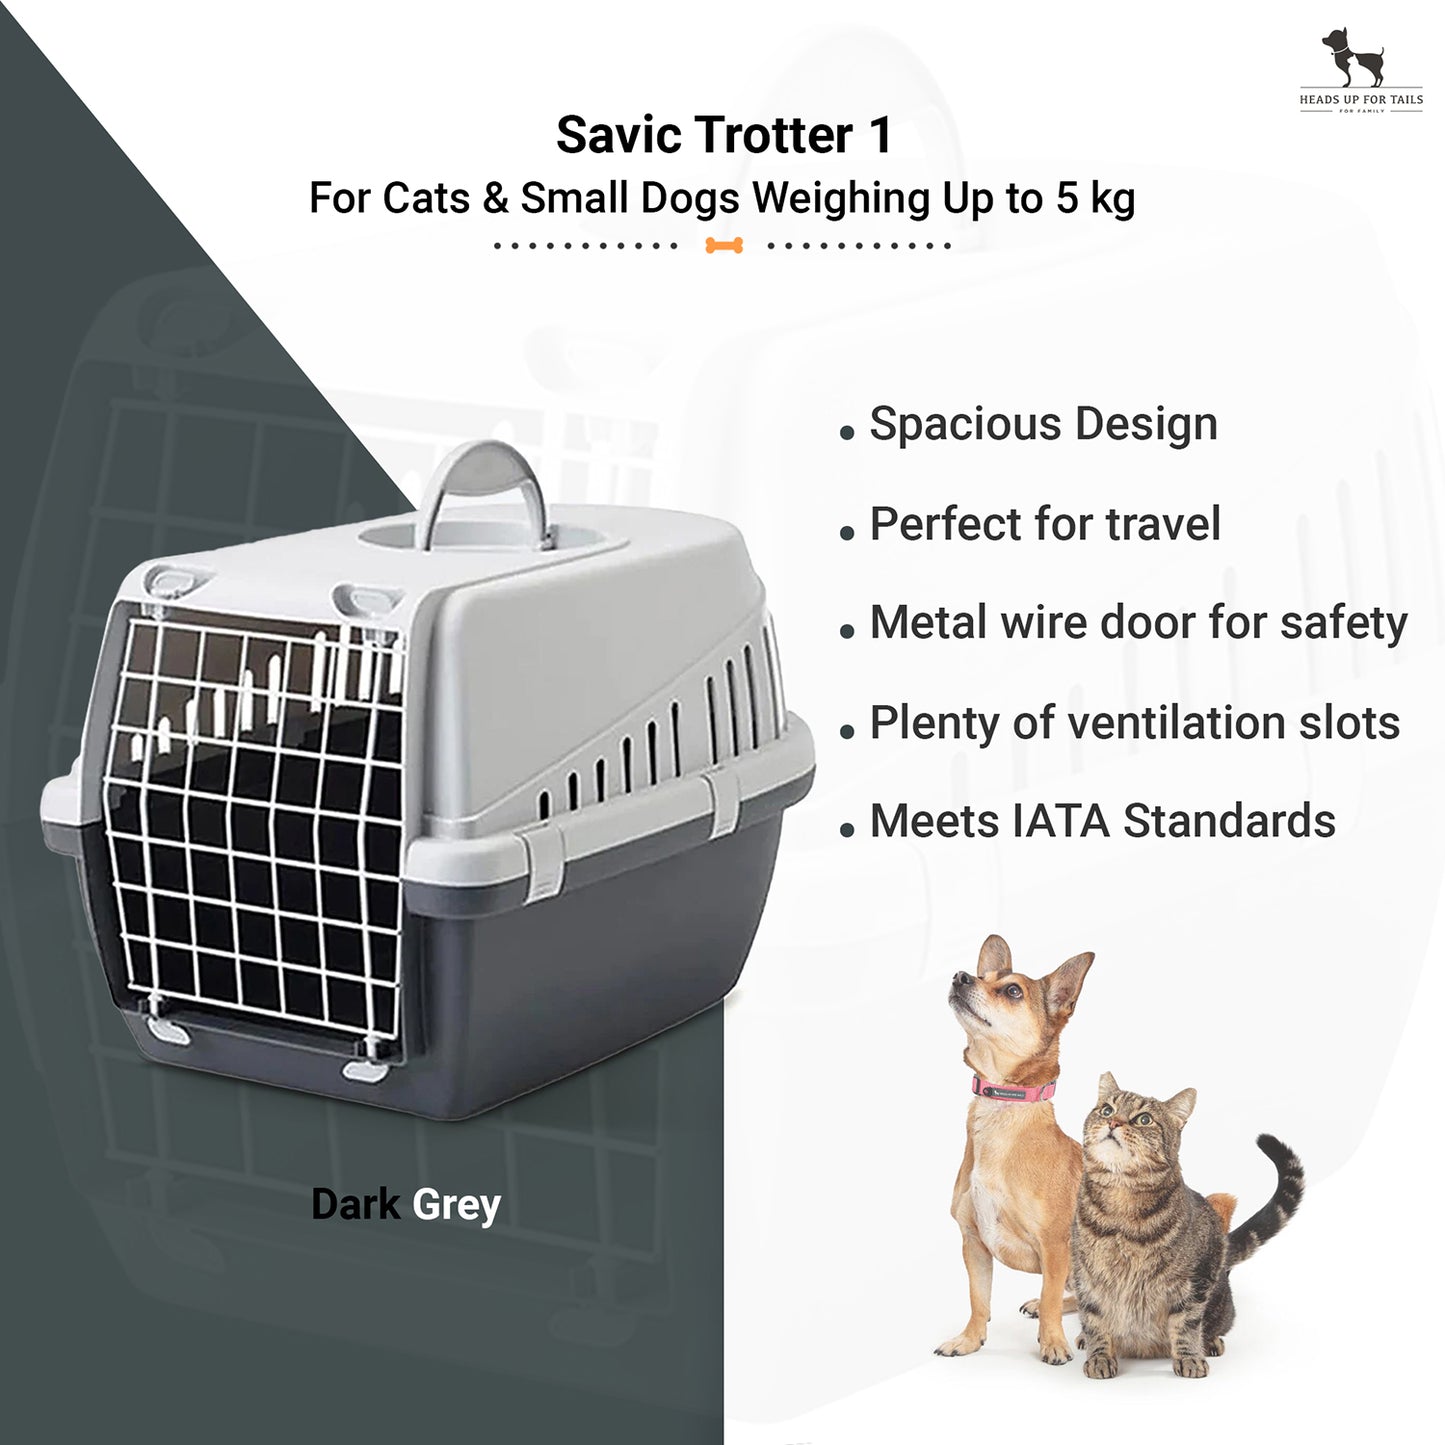 Savic Trotter 1 - Dog & Cat Carrier - Dark Grey - 19 x 13 x 12 inch - Holds up to 5 kg_02